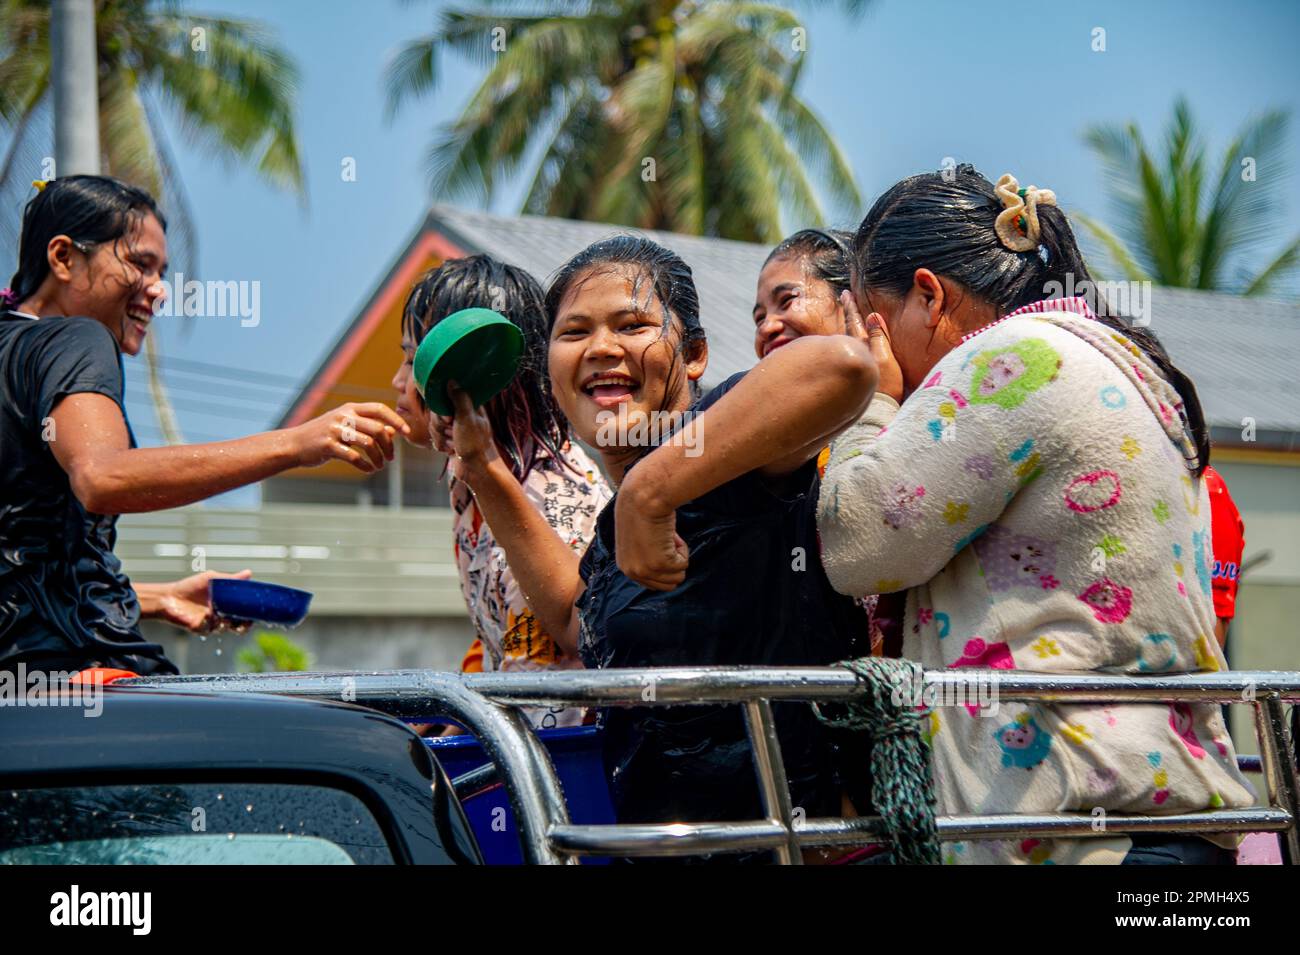 April 13 2023-Thung Wua Laen Beach - Chumphon area: Crowds celebrate Songkran, Thai New Year, by splashing each other with colored water or painting e Stock Photo